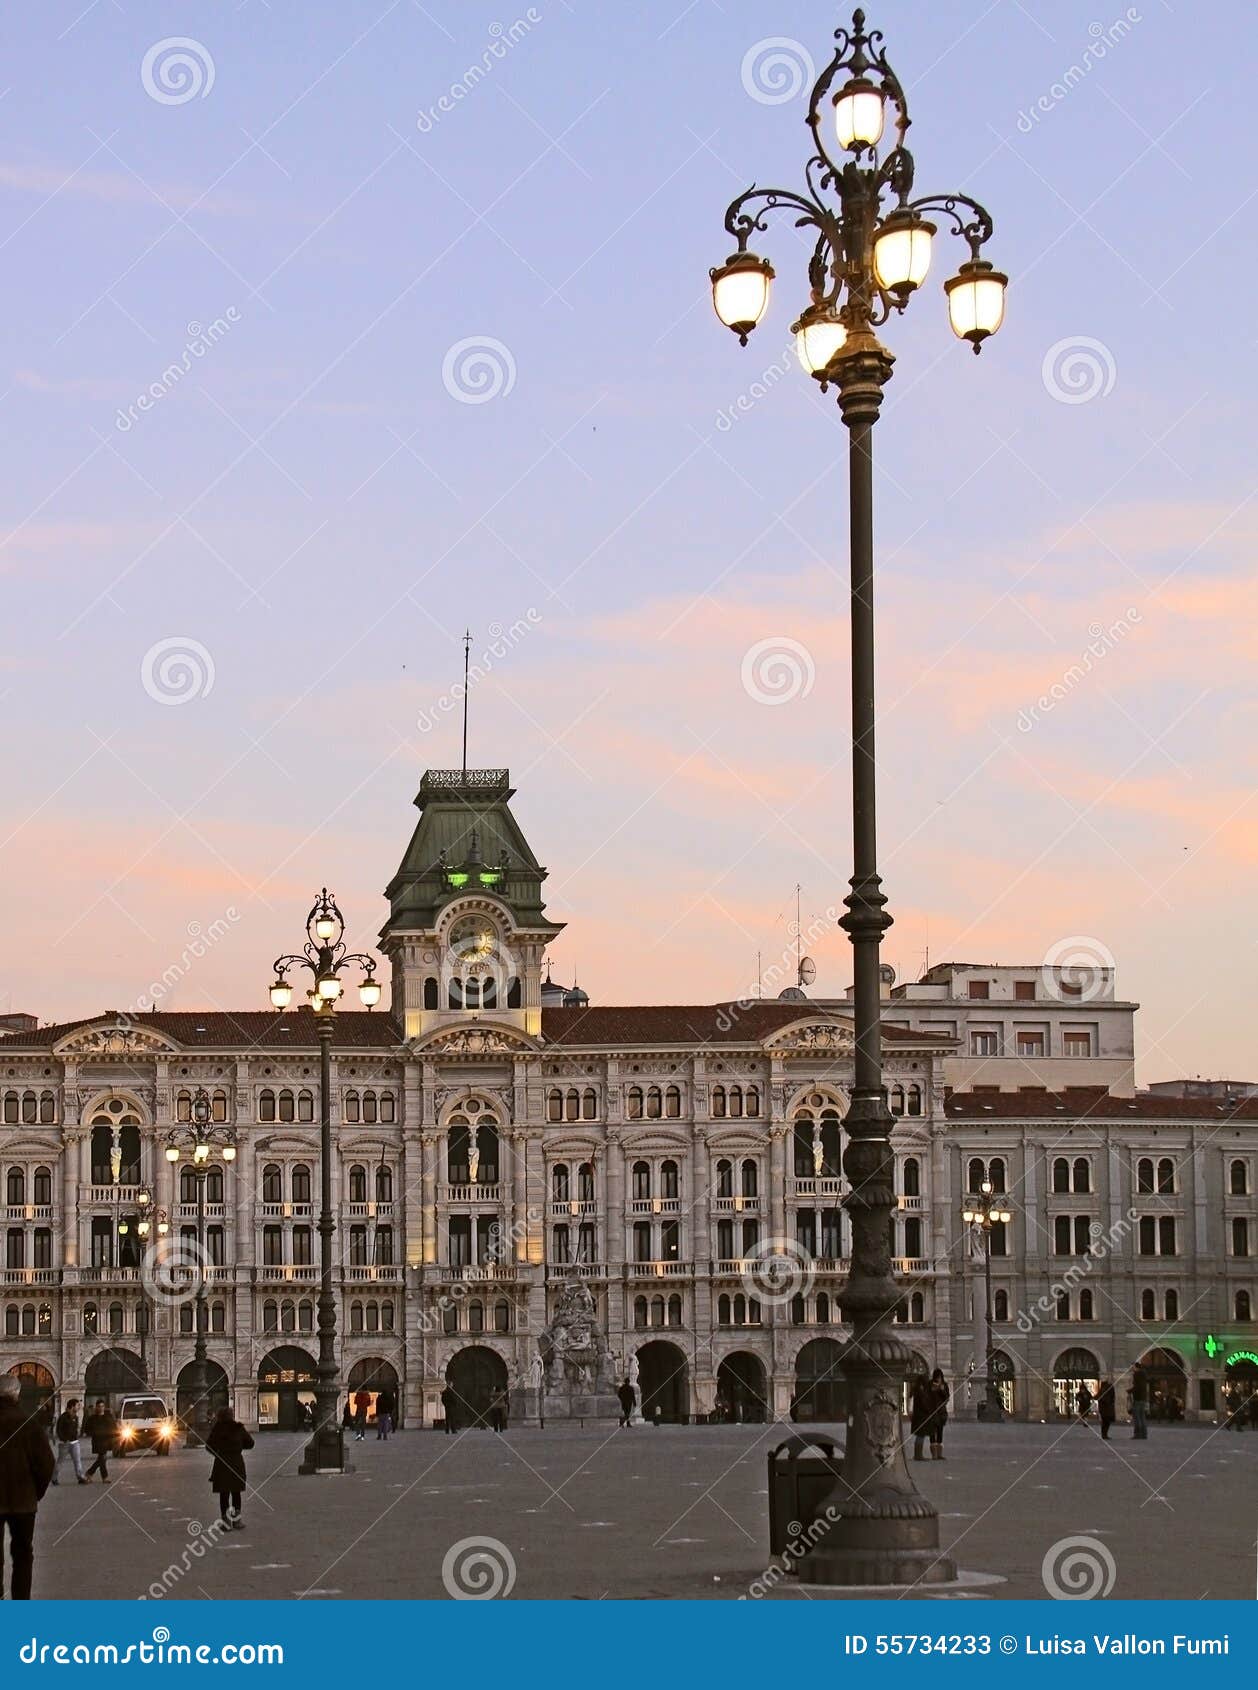 Trieste, Italy - Citi Hall in Union of Italy square at twilight. Trieste, Italy - Union of Italy square at twilight with lit street lamps and the view of city s municipal building